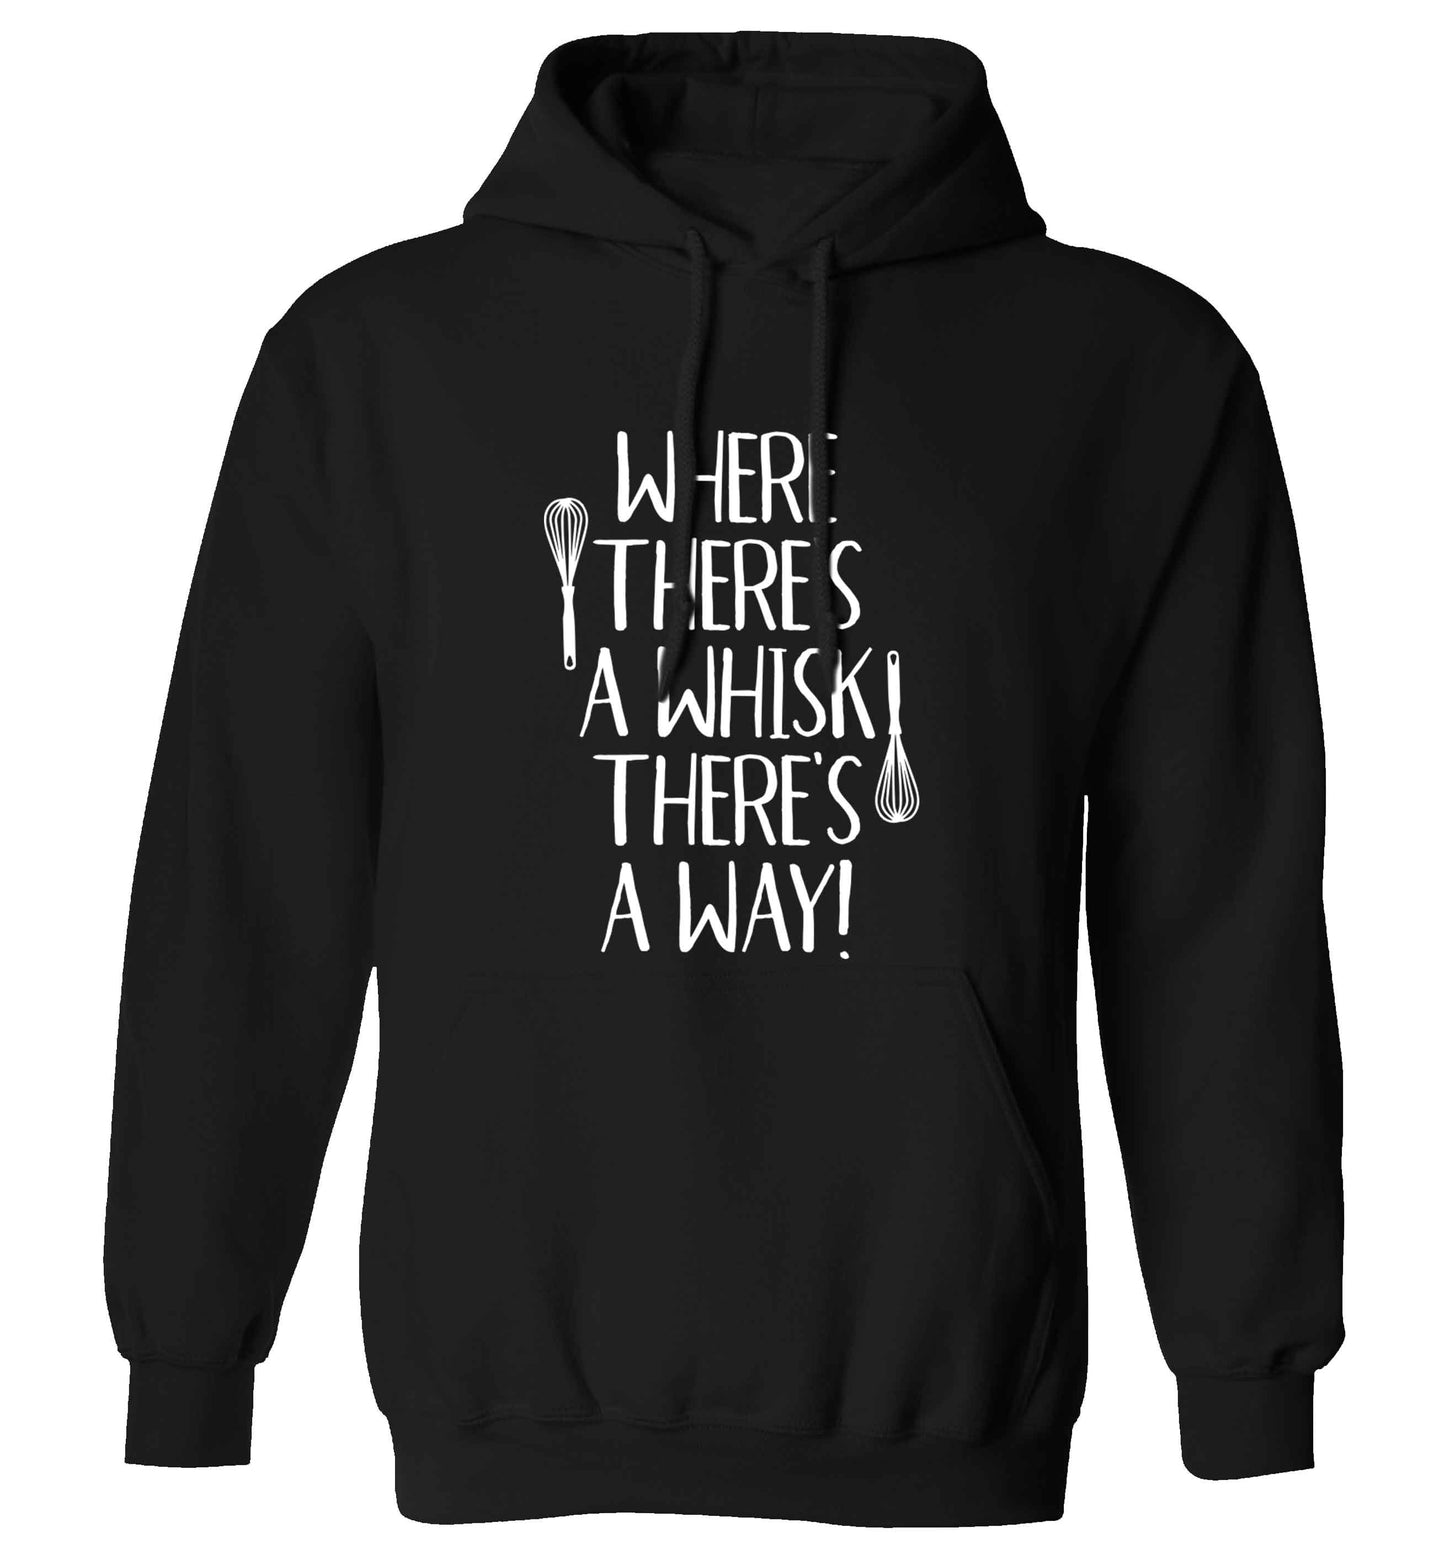 Where there's a whisk there's a way adults unisex black hoodie 2XL